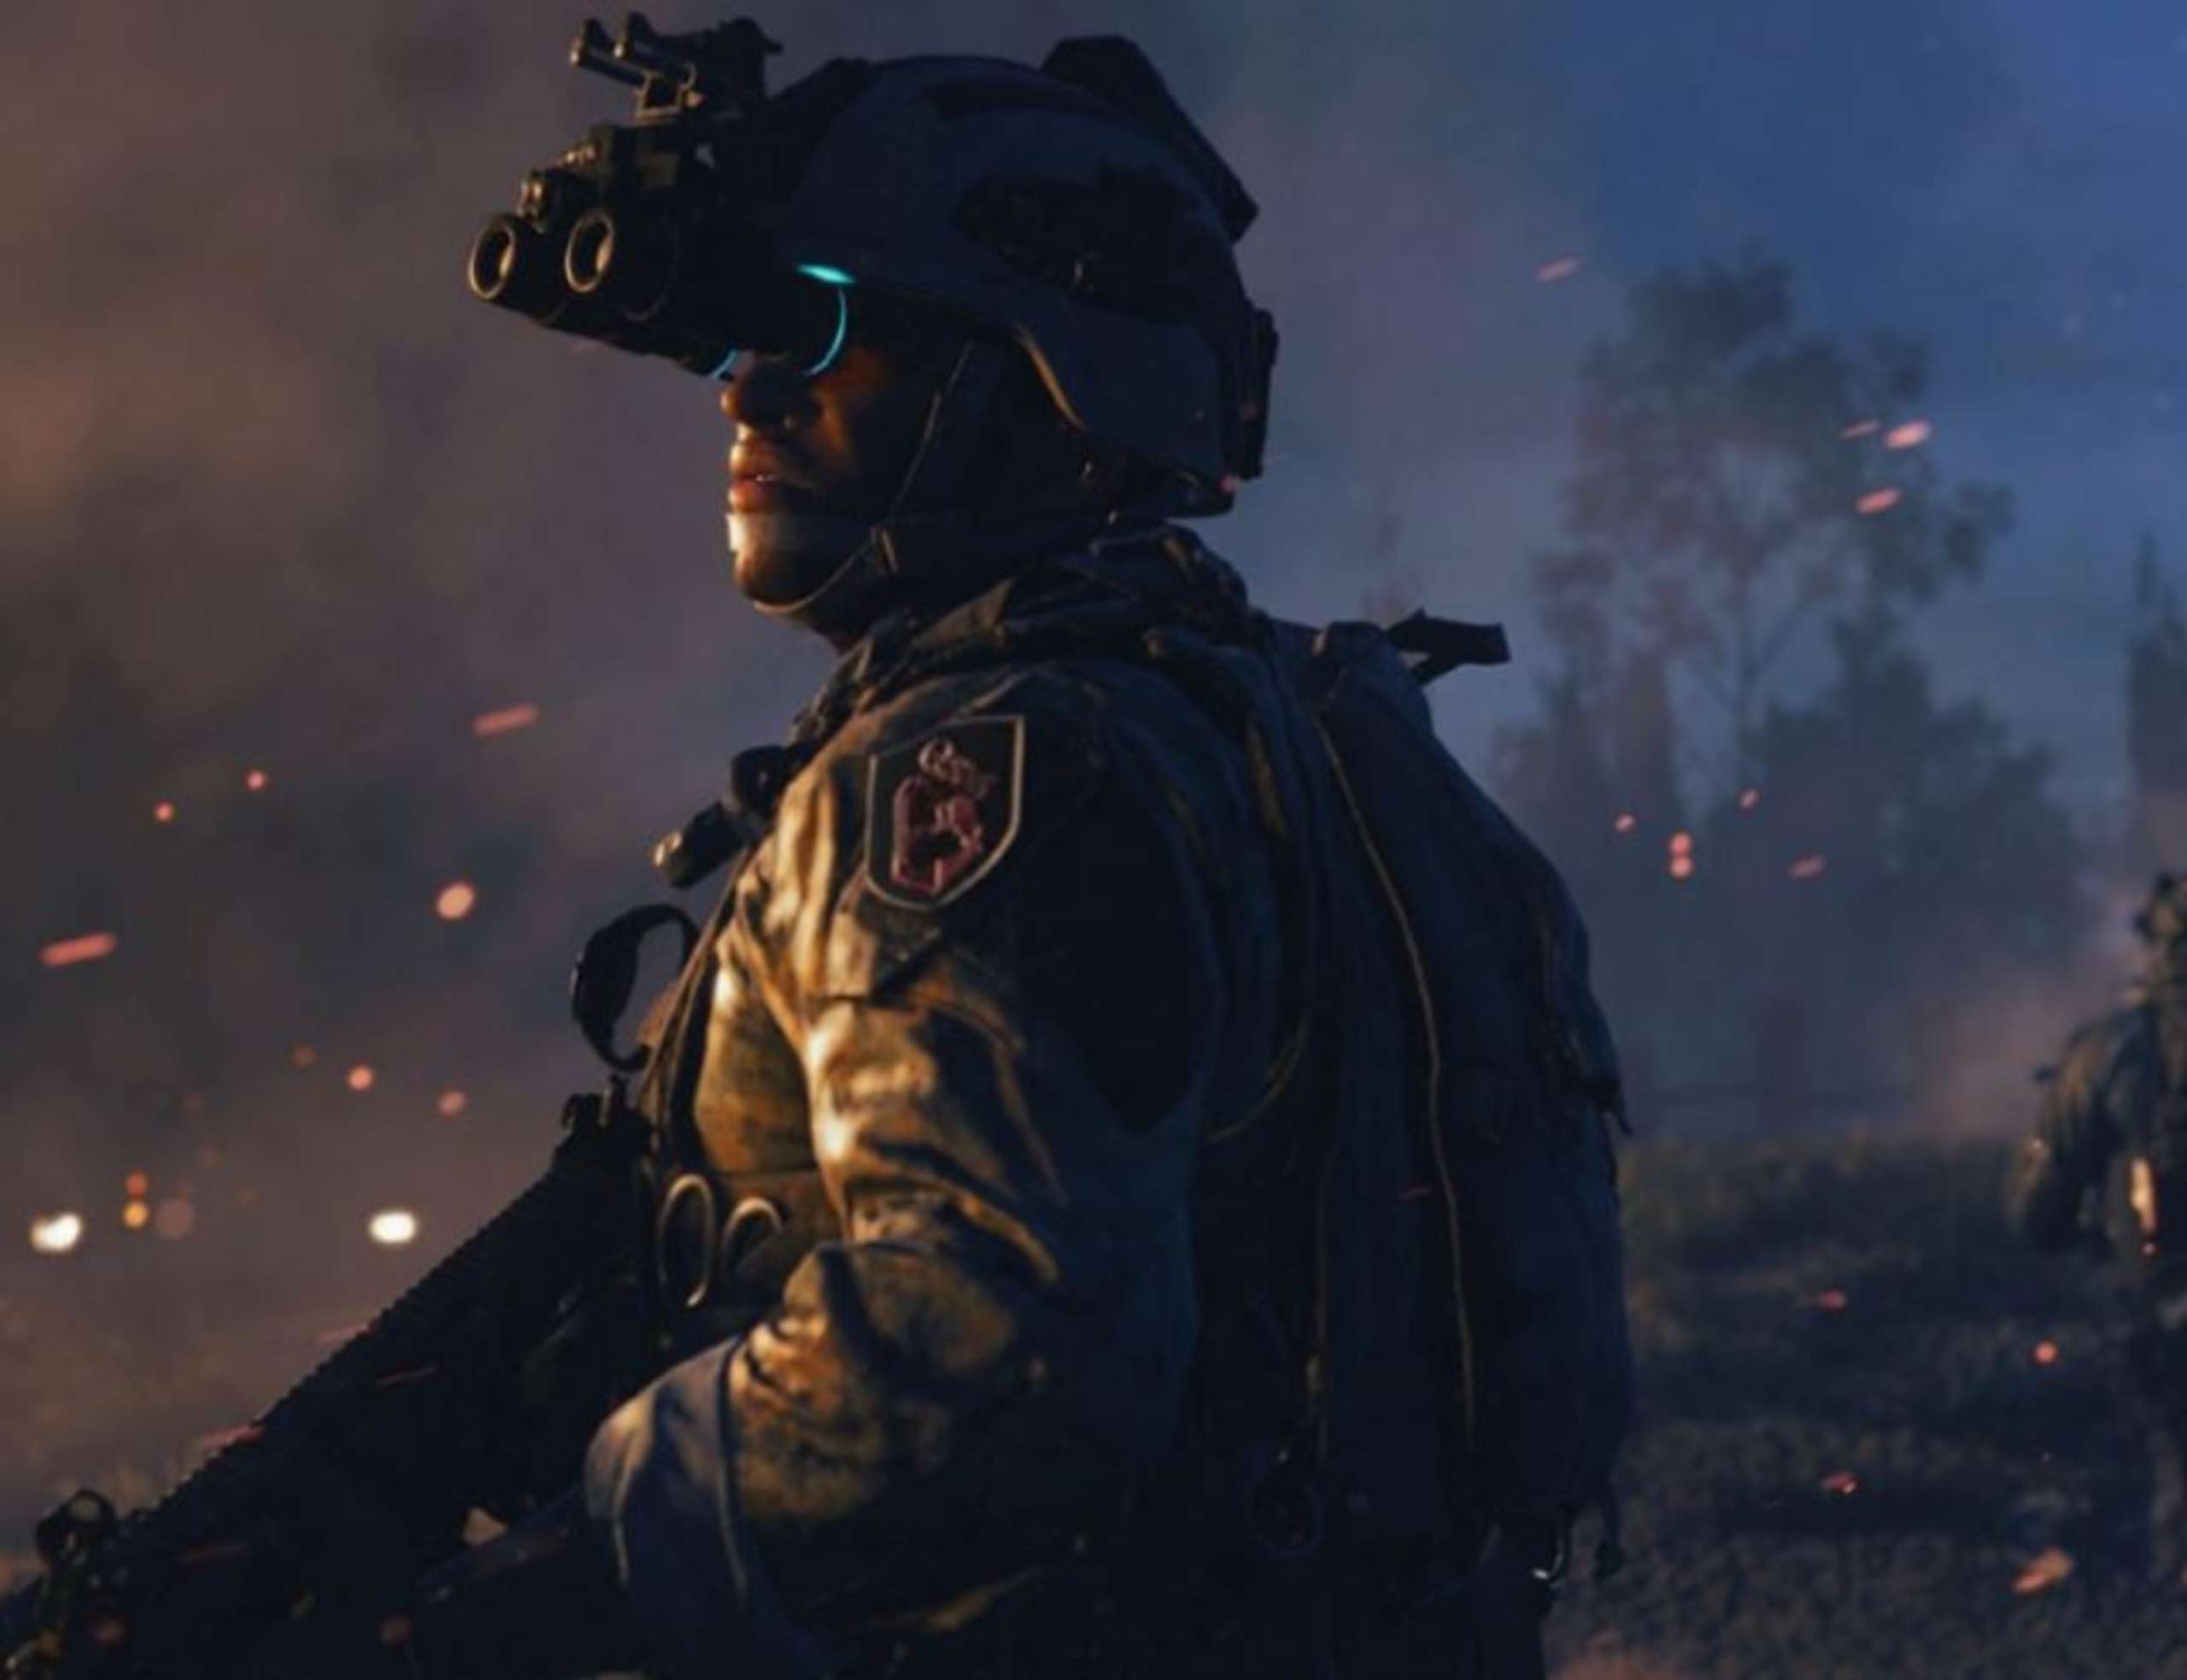 Microsoft’s Phil Spencer Has Stated That The PlayStation Version Of Call Of Duty Will Continue To Be Available And That The Franchise May Even Be Ported To Other Systems